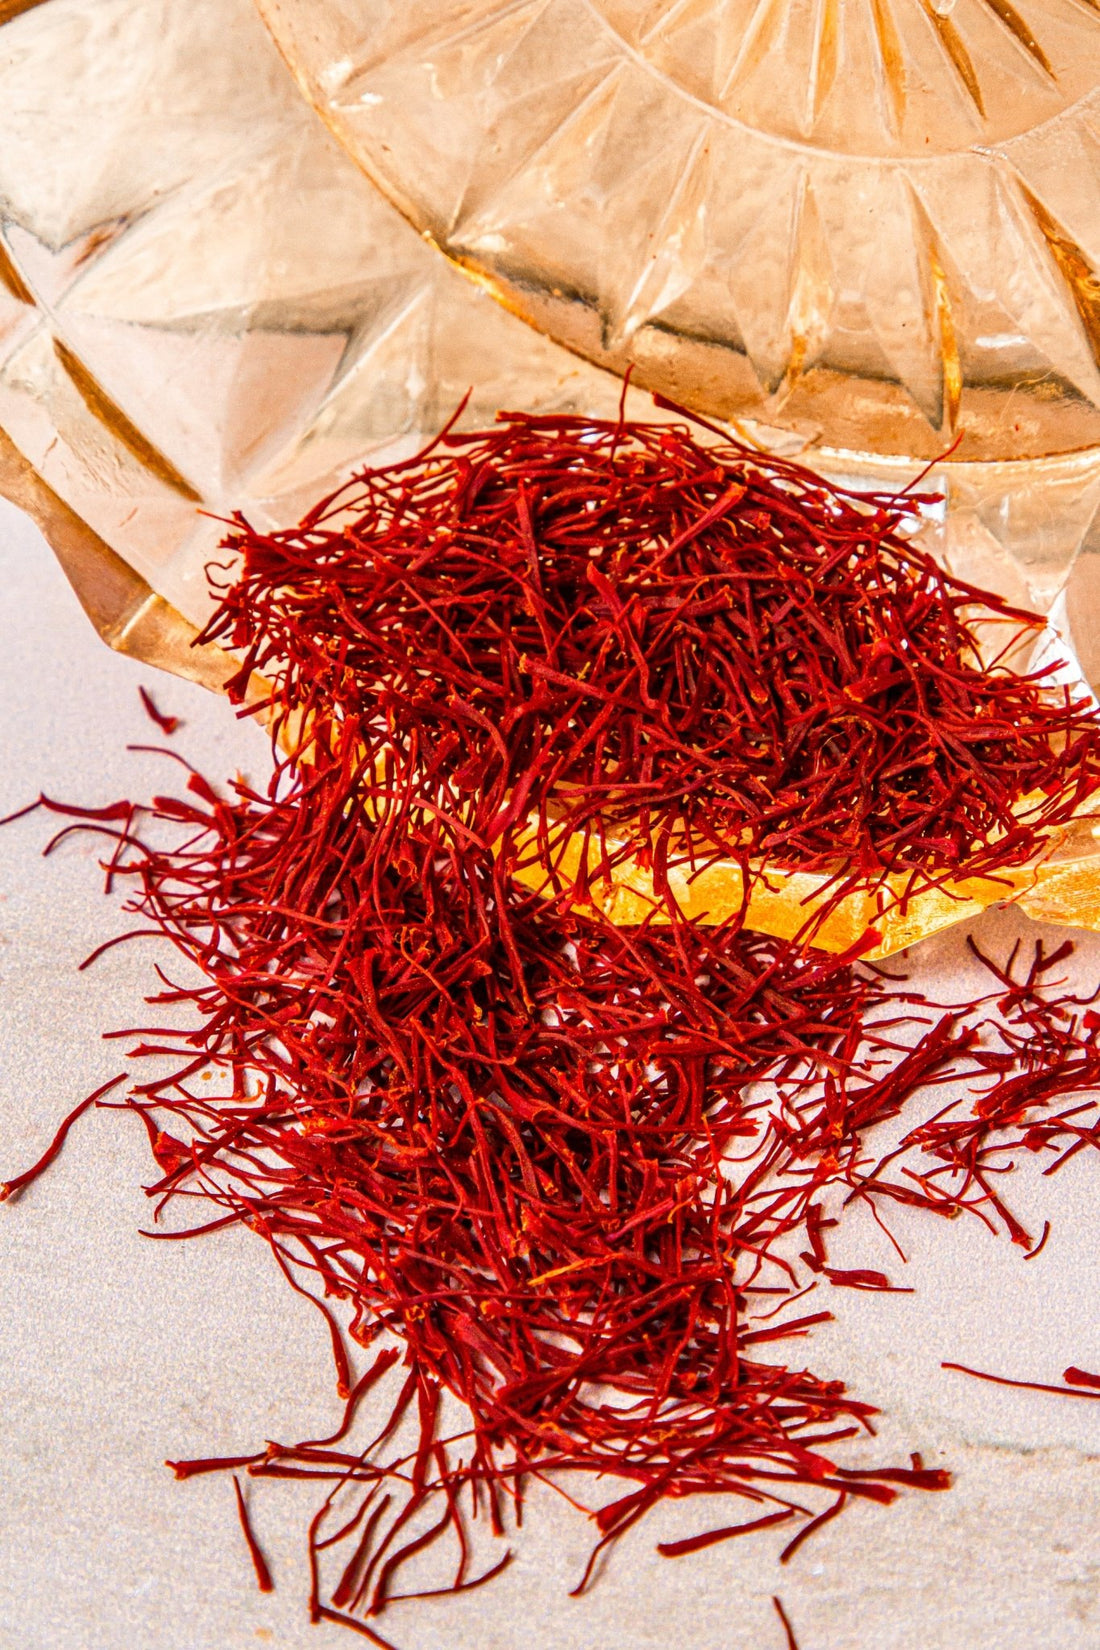 Meet Your Health And Wellness Goals For The New Year With Saffron - Rumi Spice